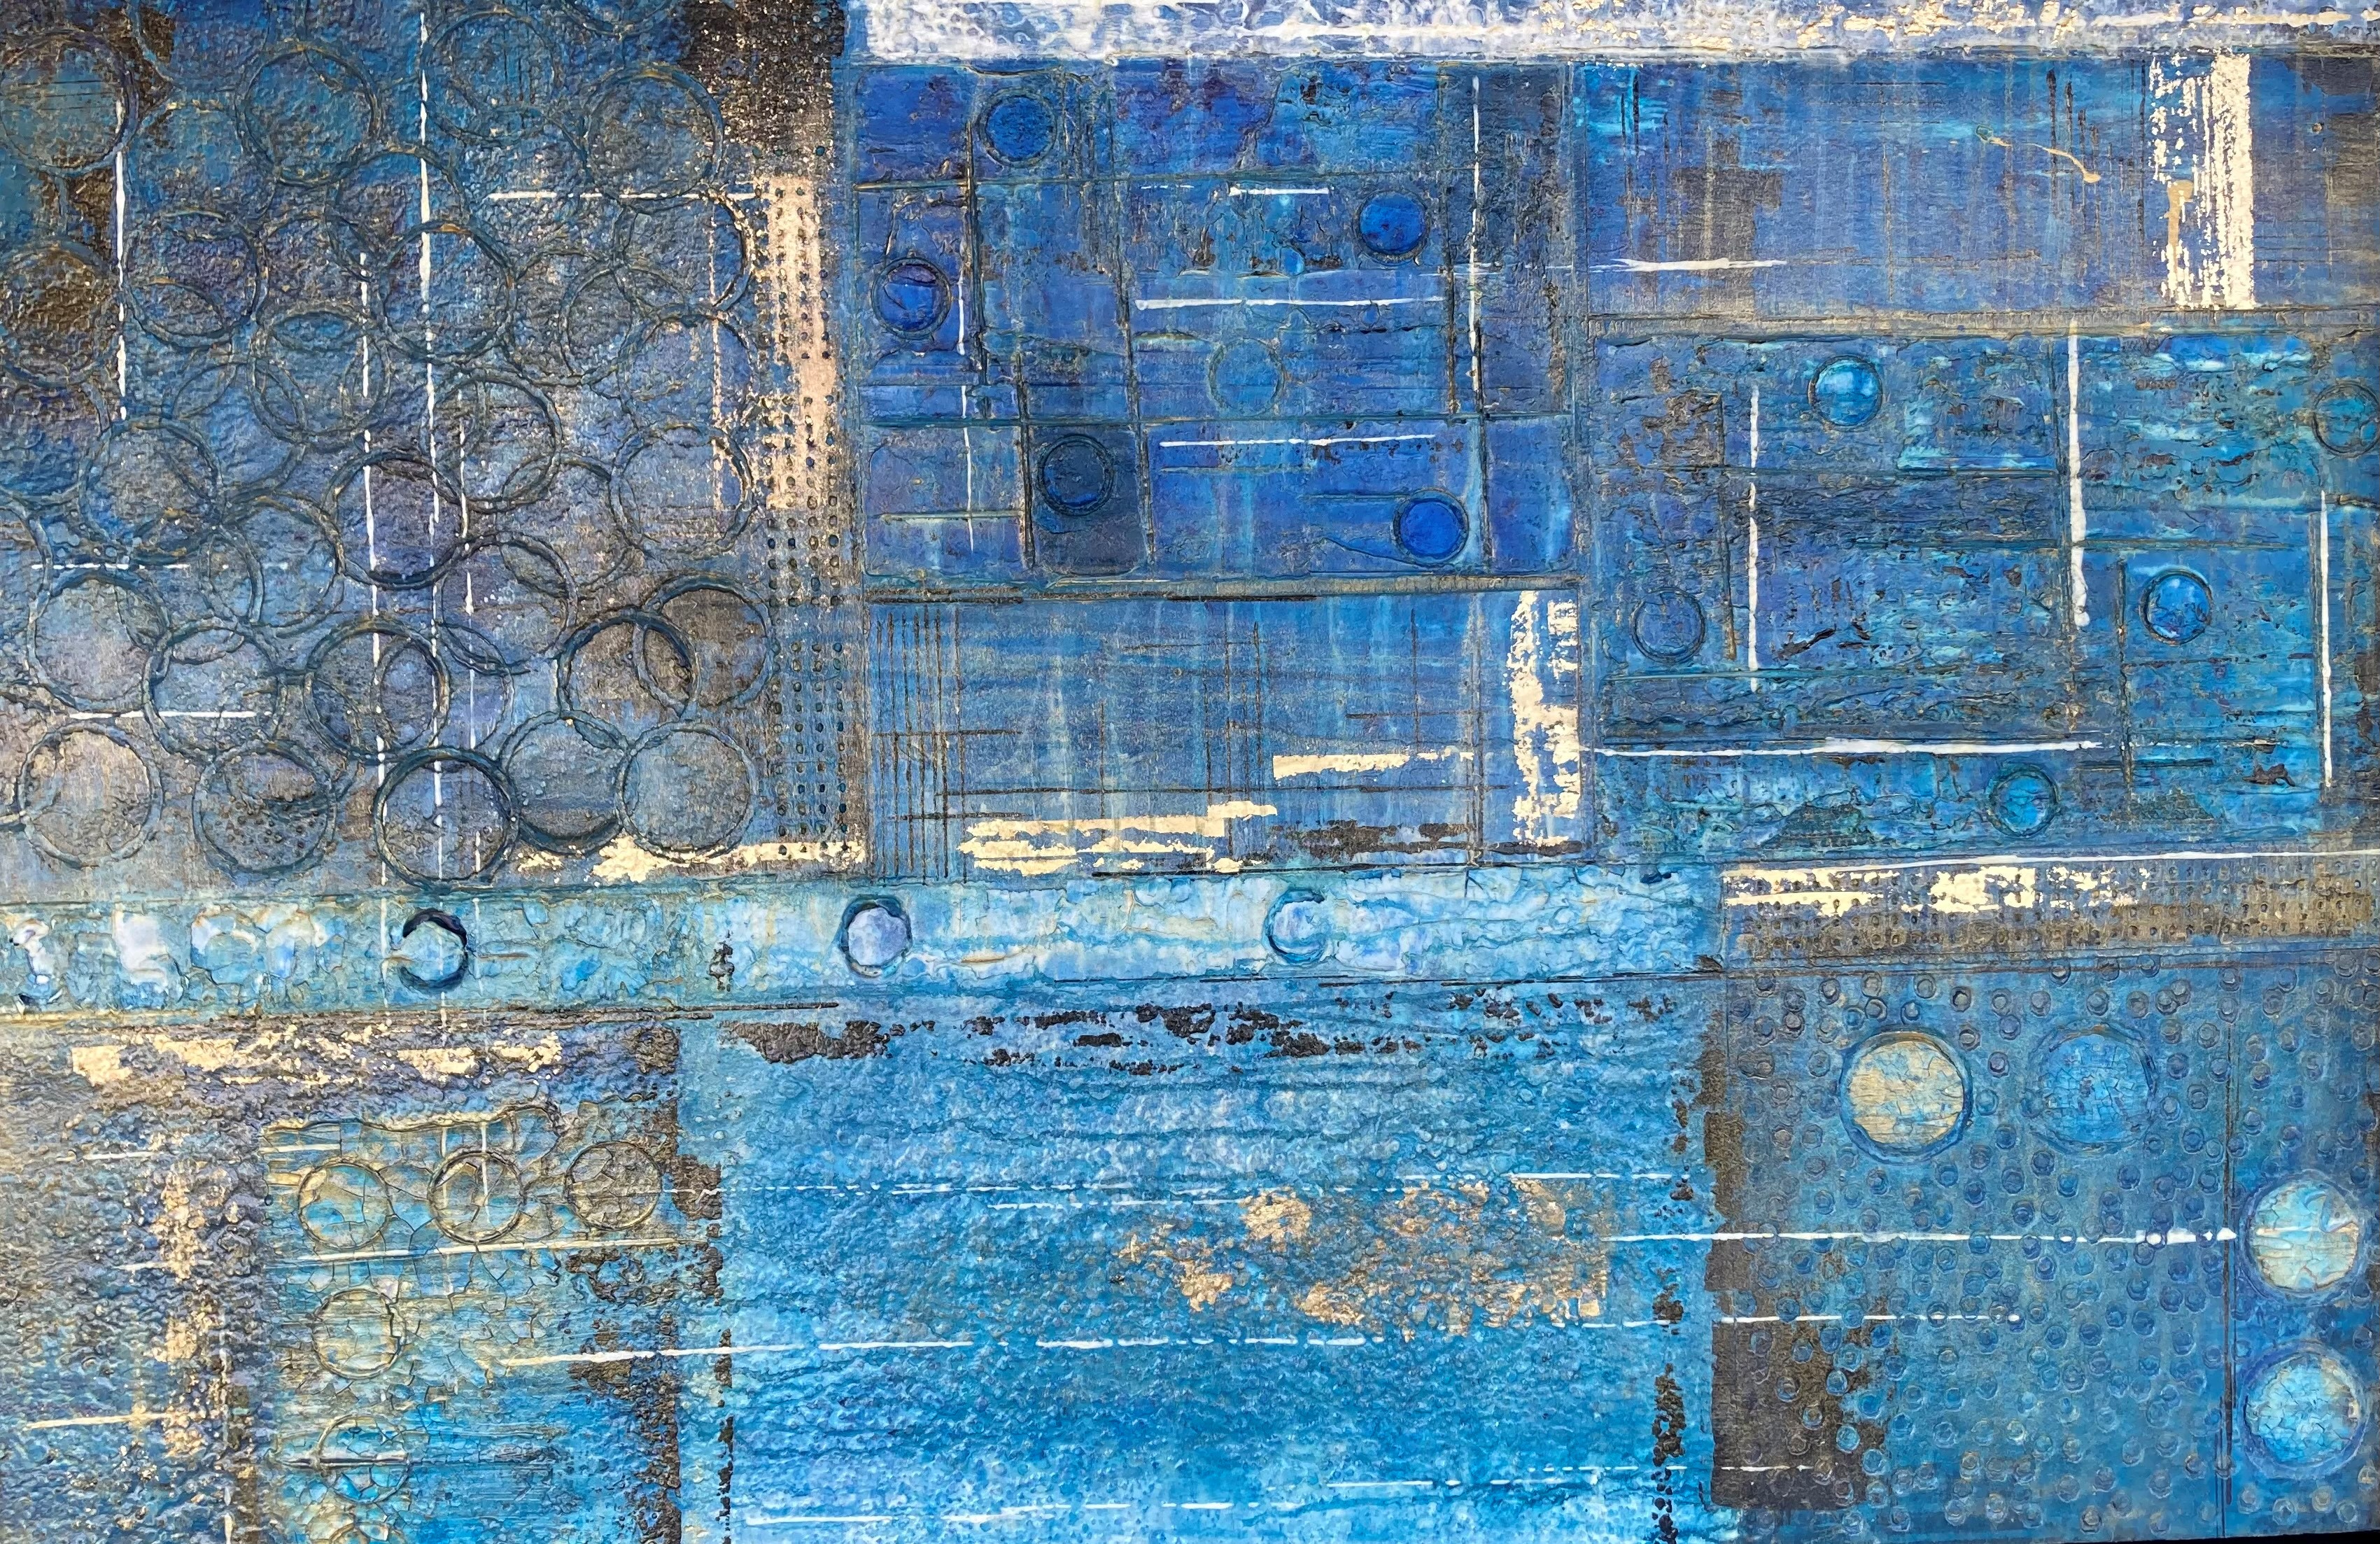 A painting made with several hues of the color blue